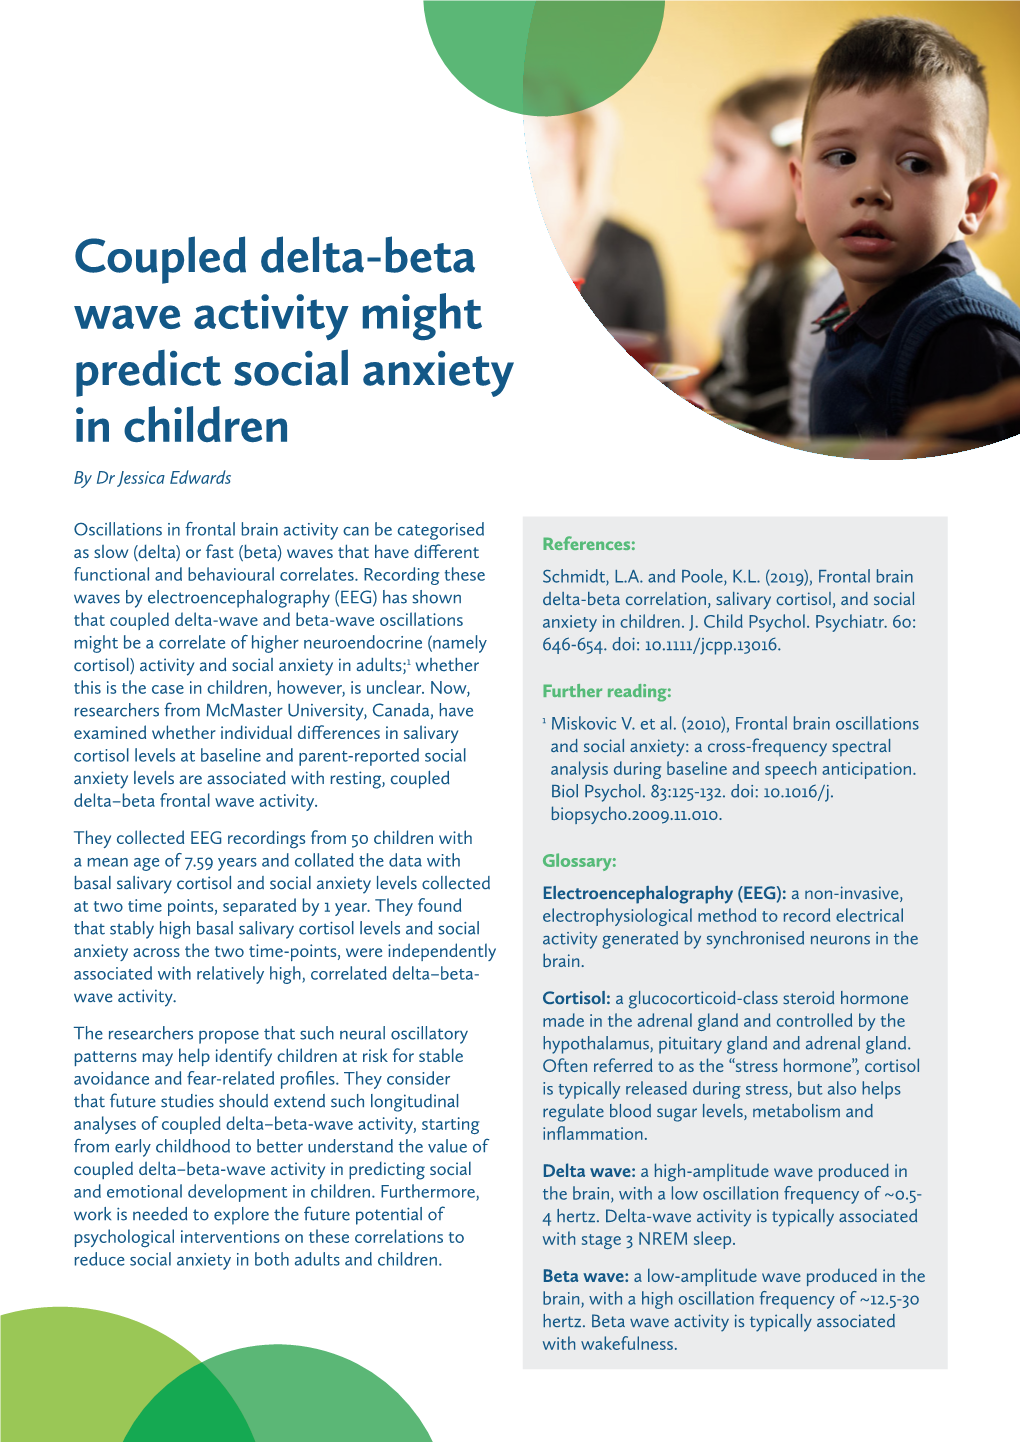 Coupled Delta-Beta Wave Activity Might Predict Social Anxiety in Children by Dr Jessica Edwards